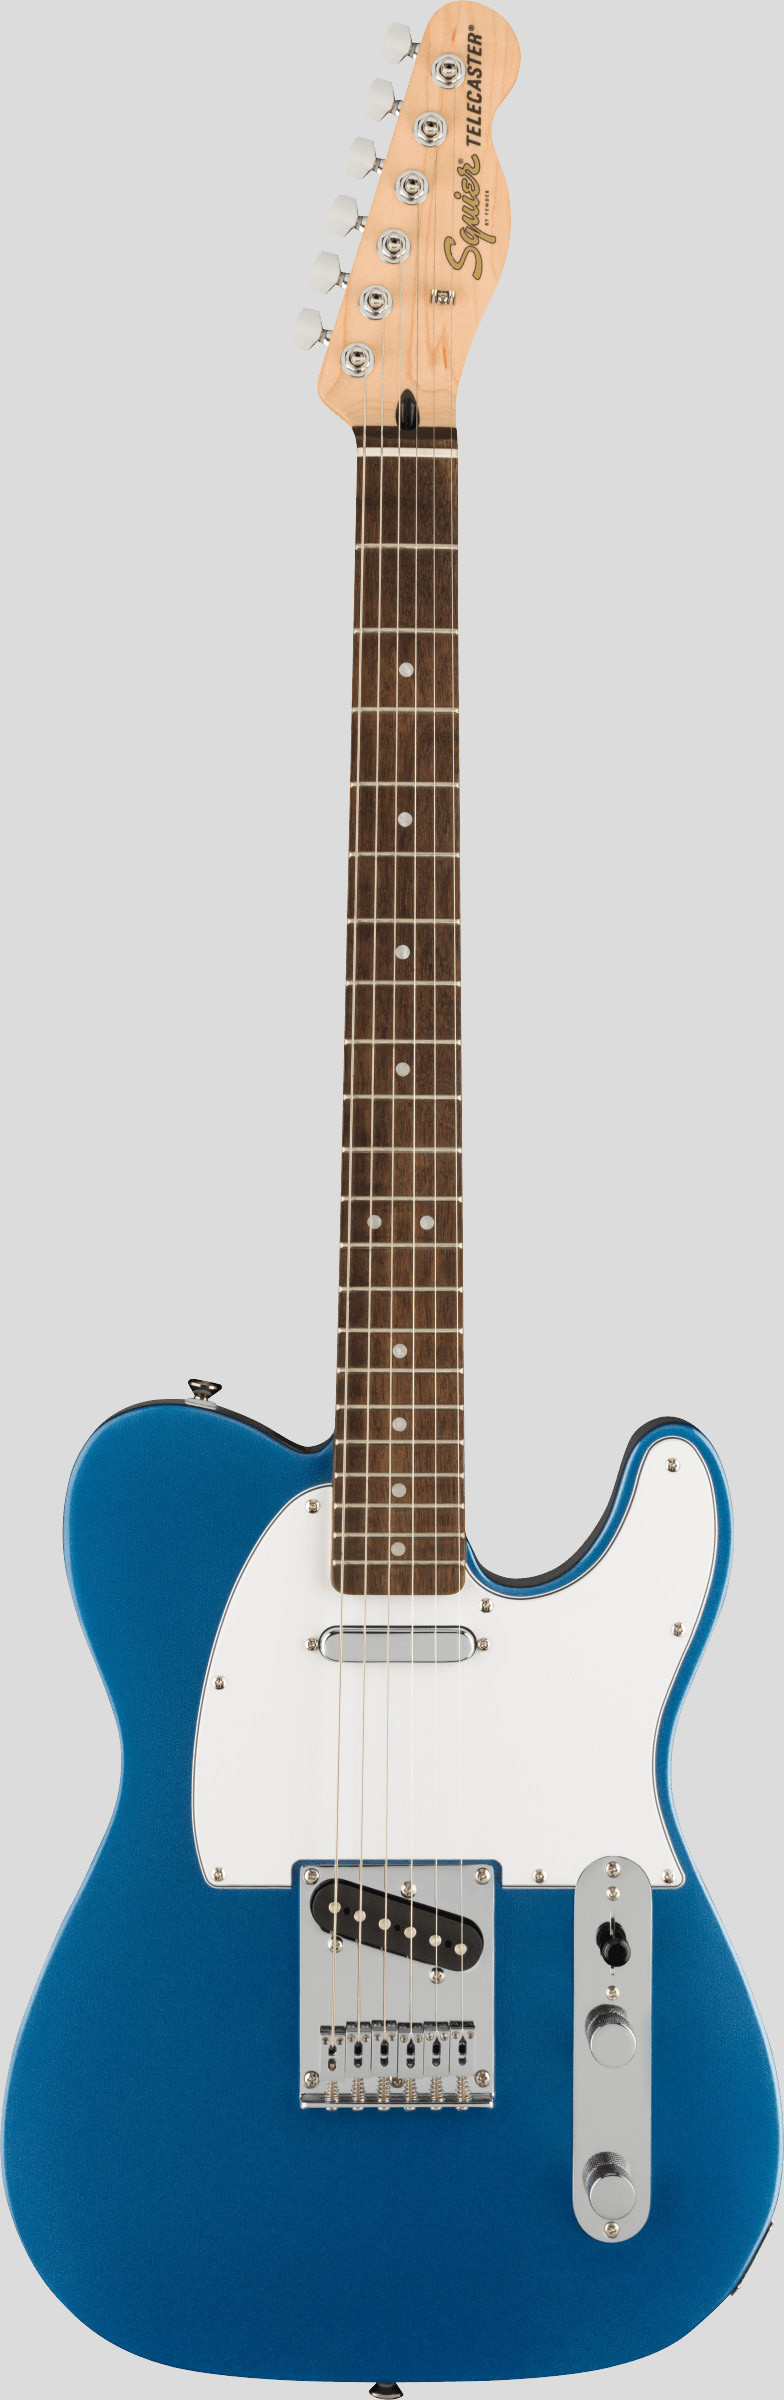 Squier by Fender Affinity Telecaster Lake Placid Blue 1